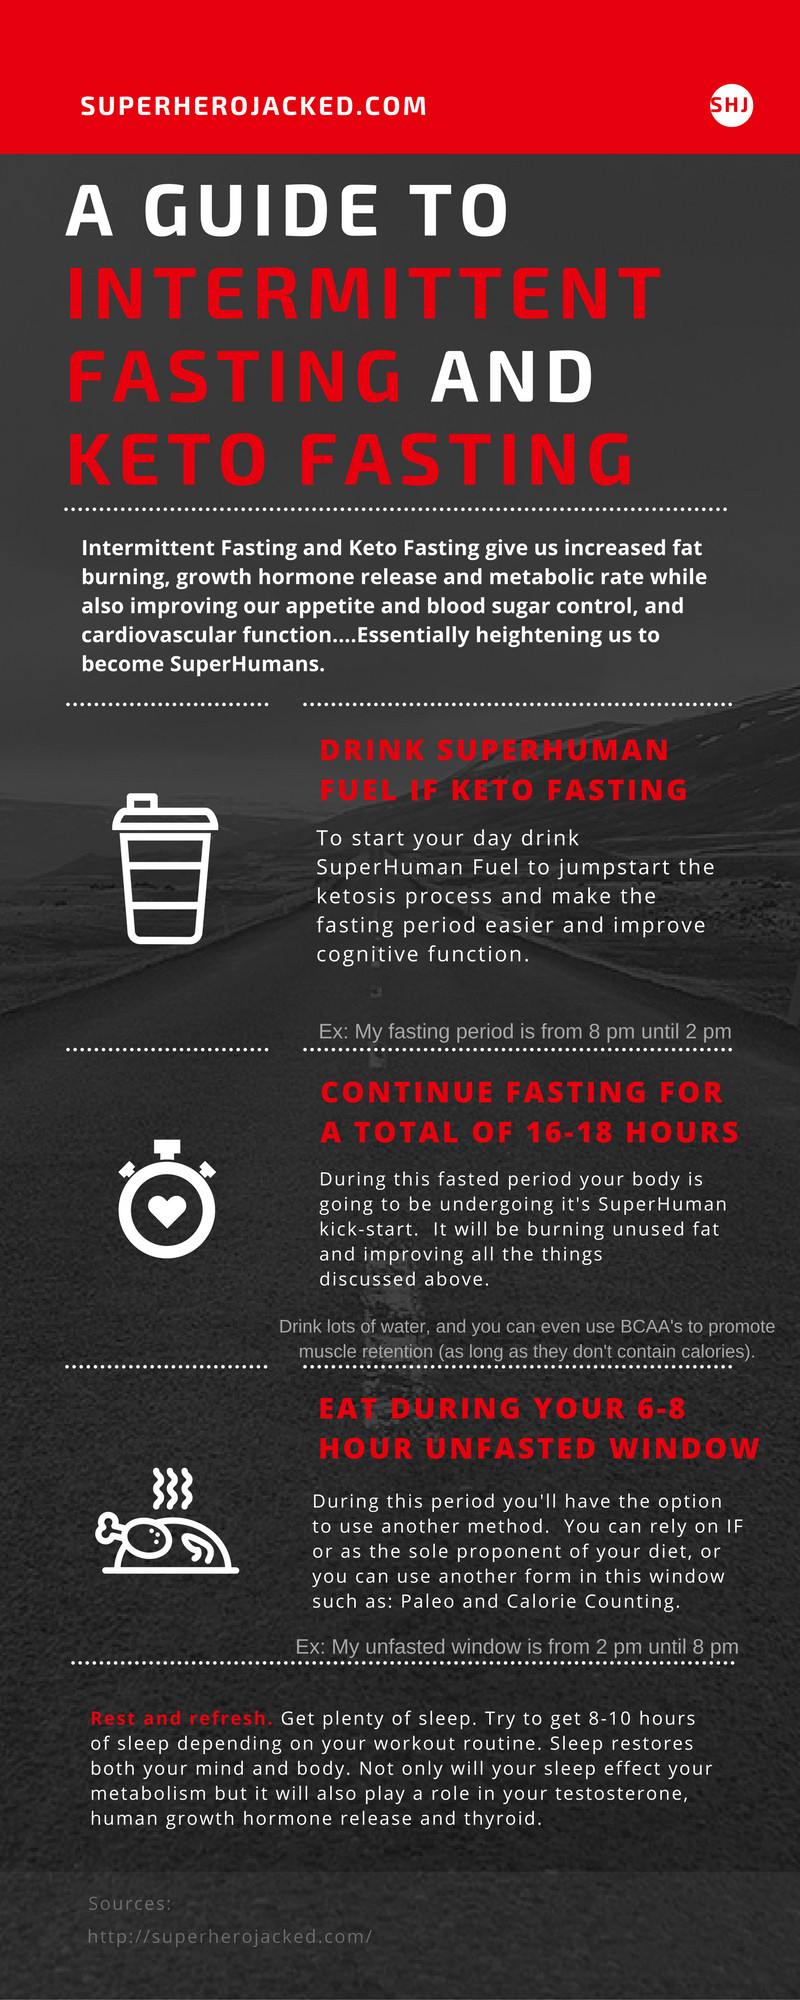 Keto Diet And Intermittent Fasting
 A Guide to Intermittent Fasting and Keto Fasting [Infographic]